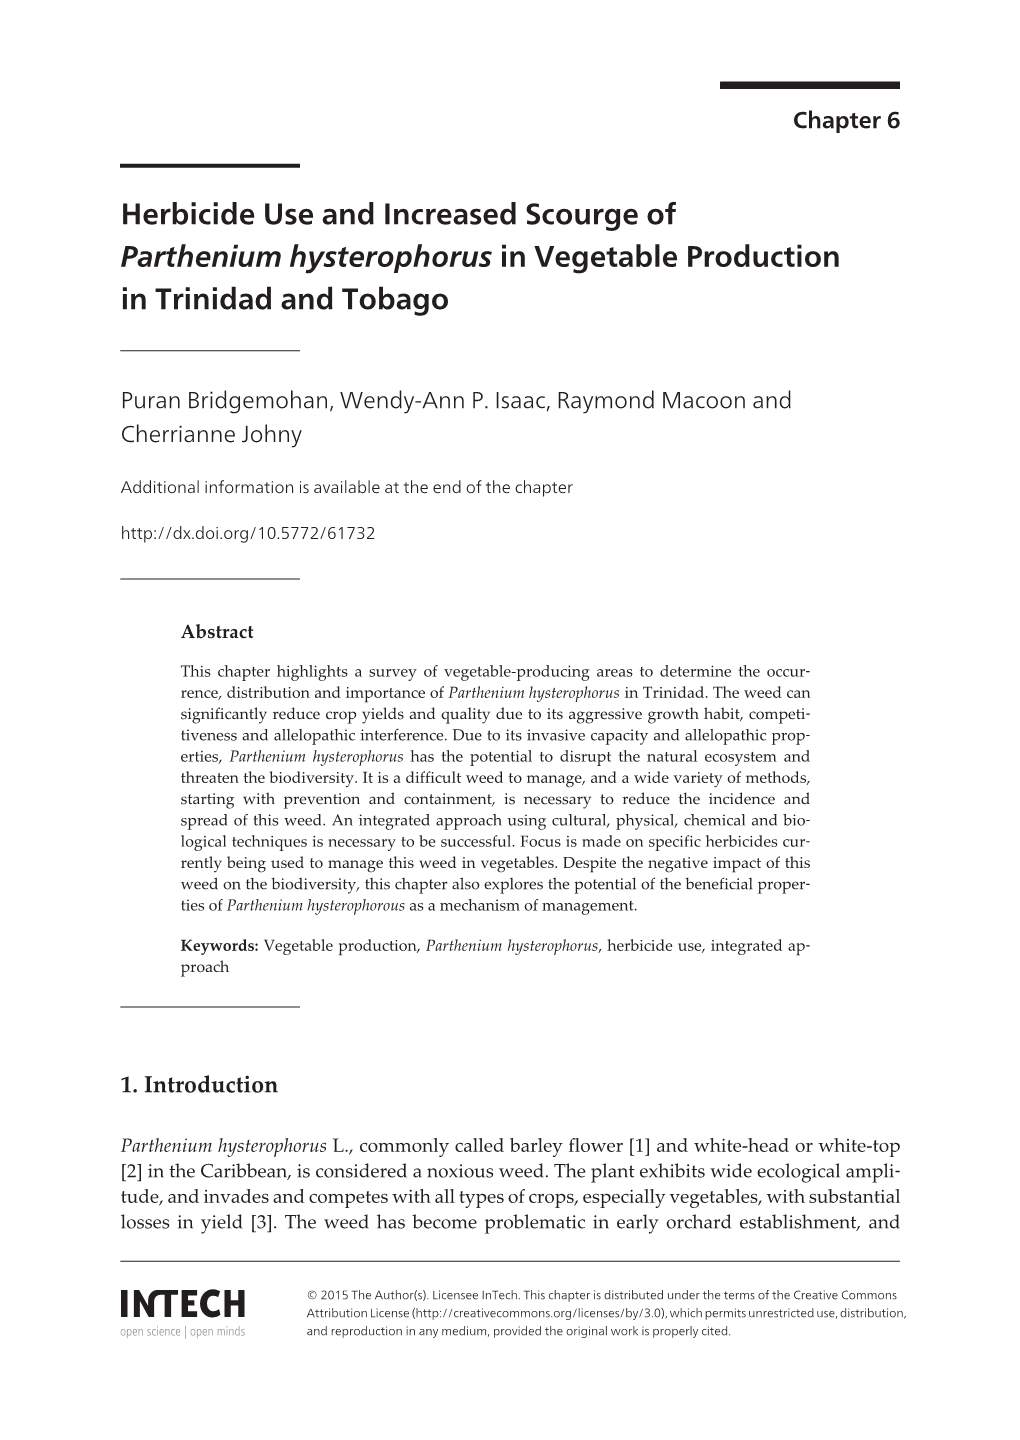 Herbicide Use and Increased Scourge of Parthenium Hysterophorus in Vegetable Production in Trinidad and Tobago